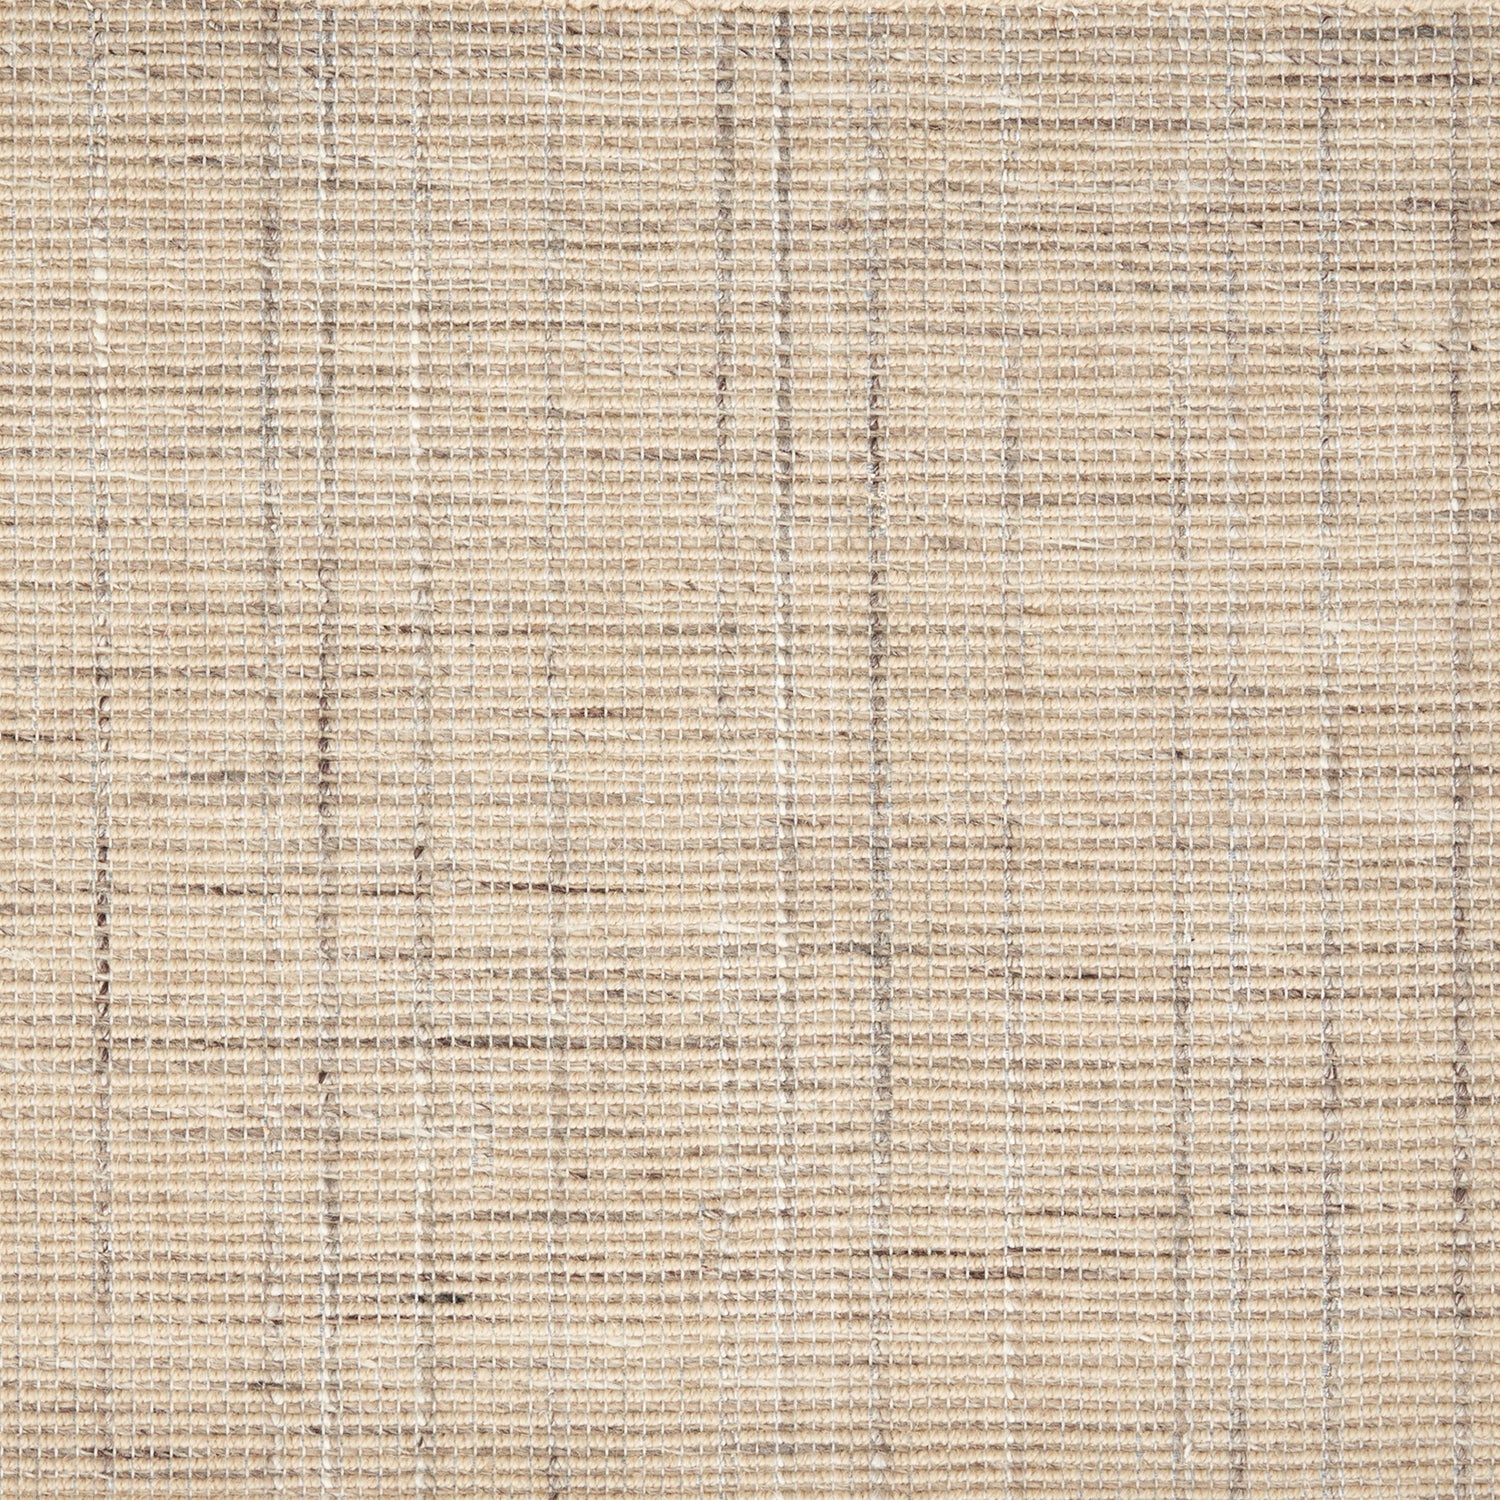 Wool-nylon broadloom carpet swatch in a textured plaid weave in tan and light brown.